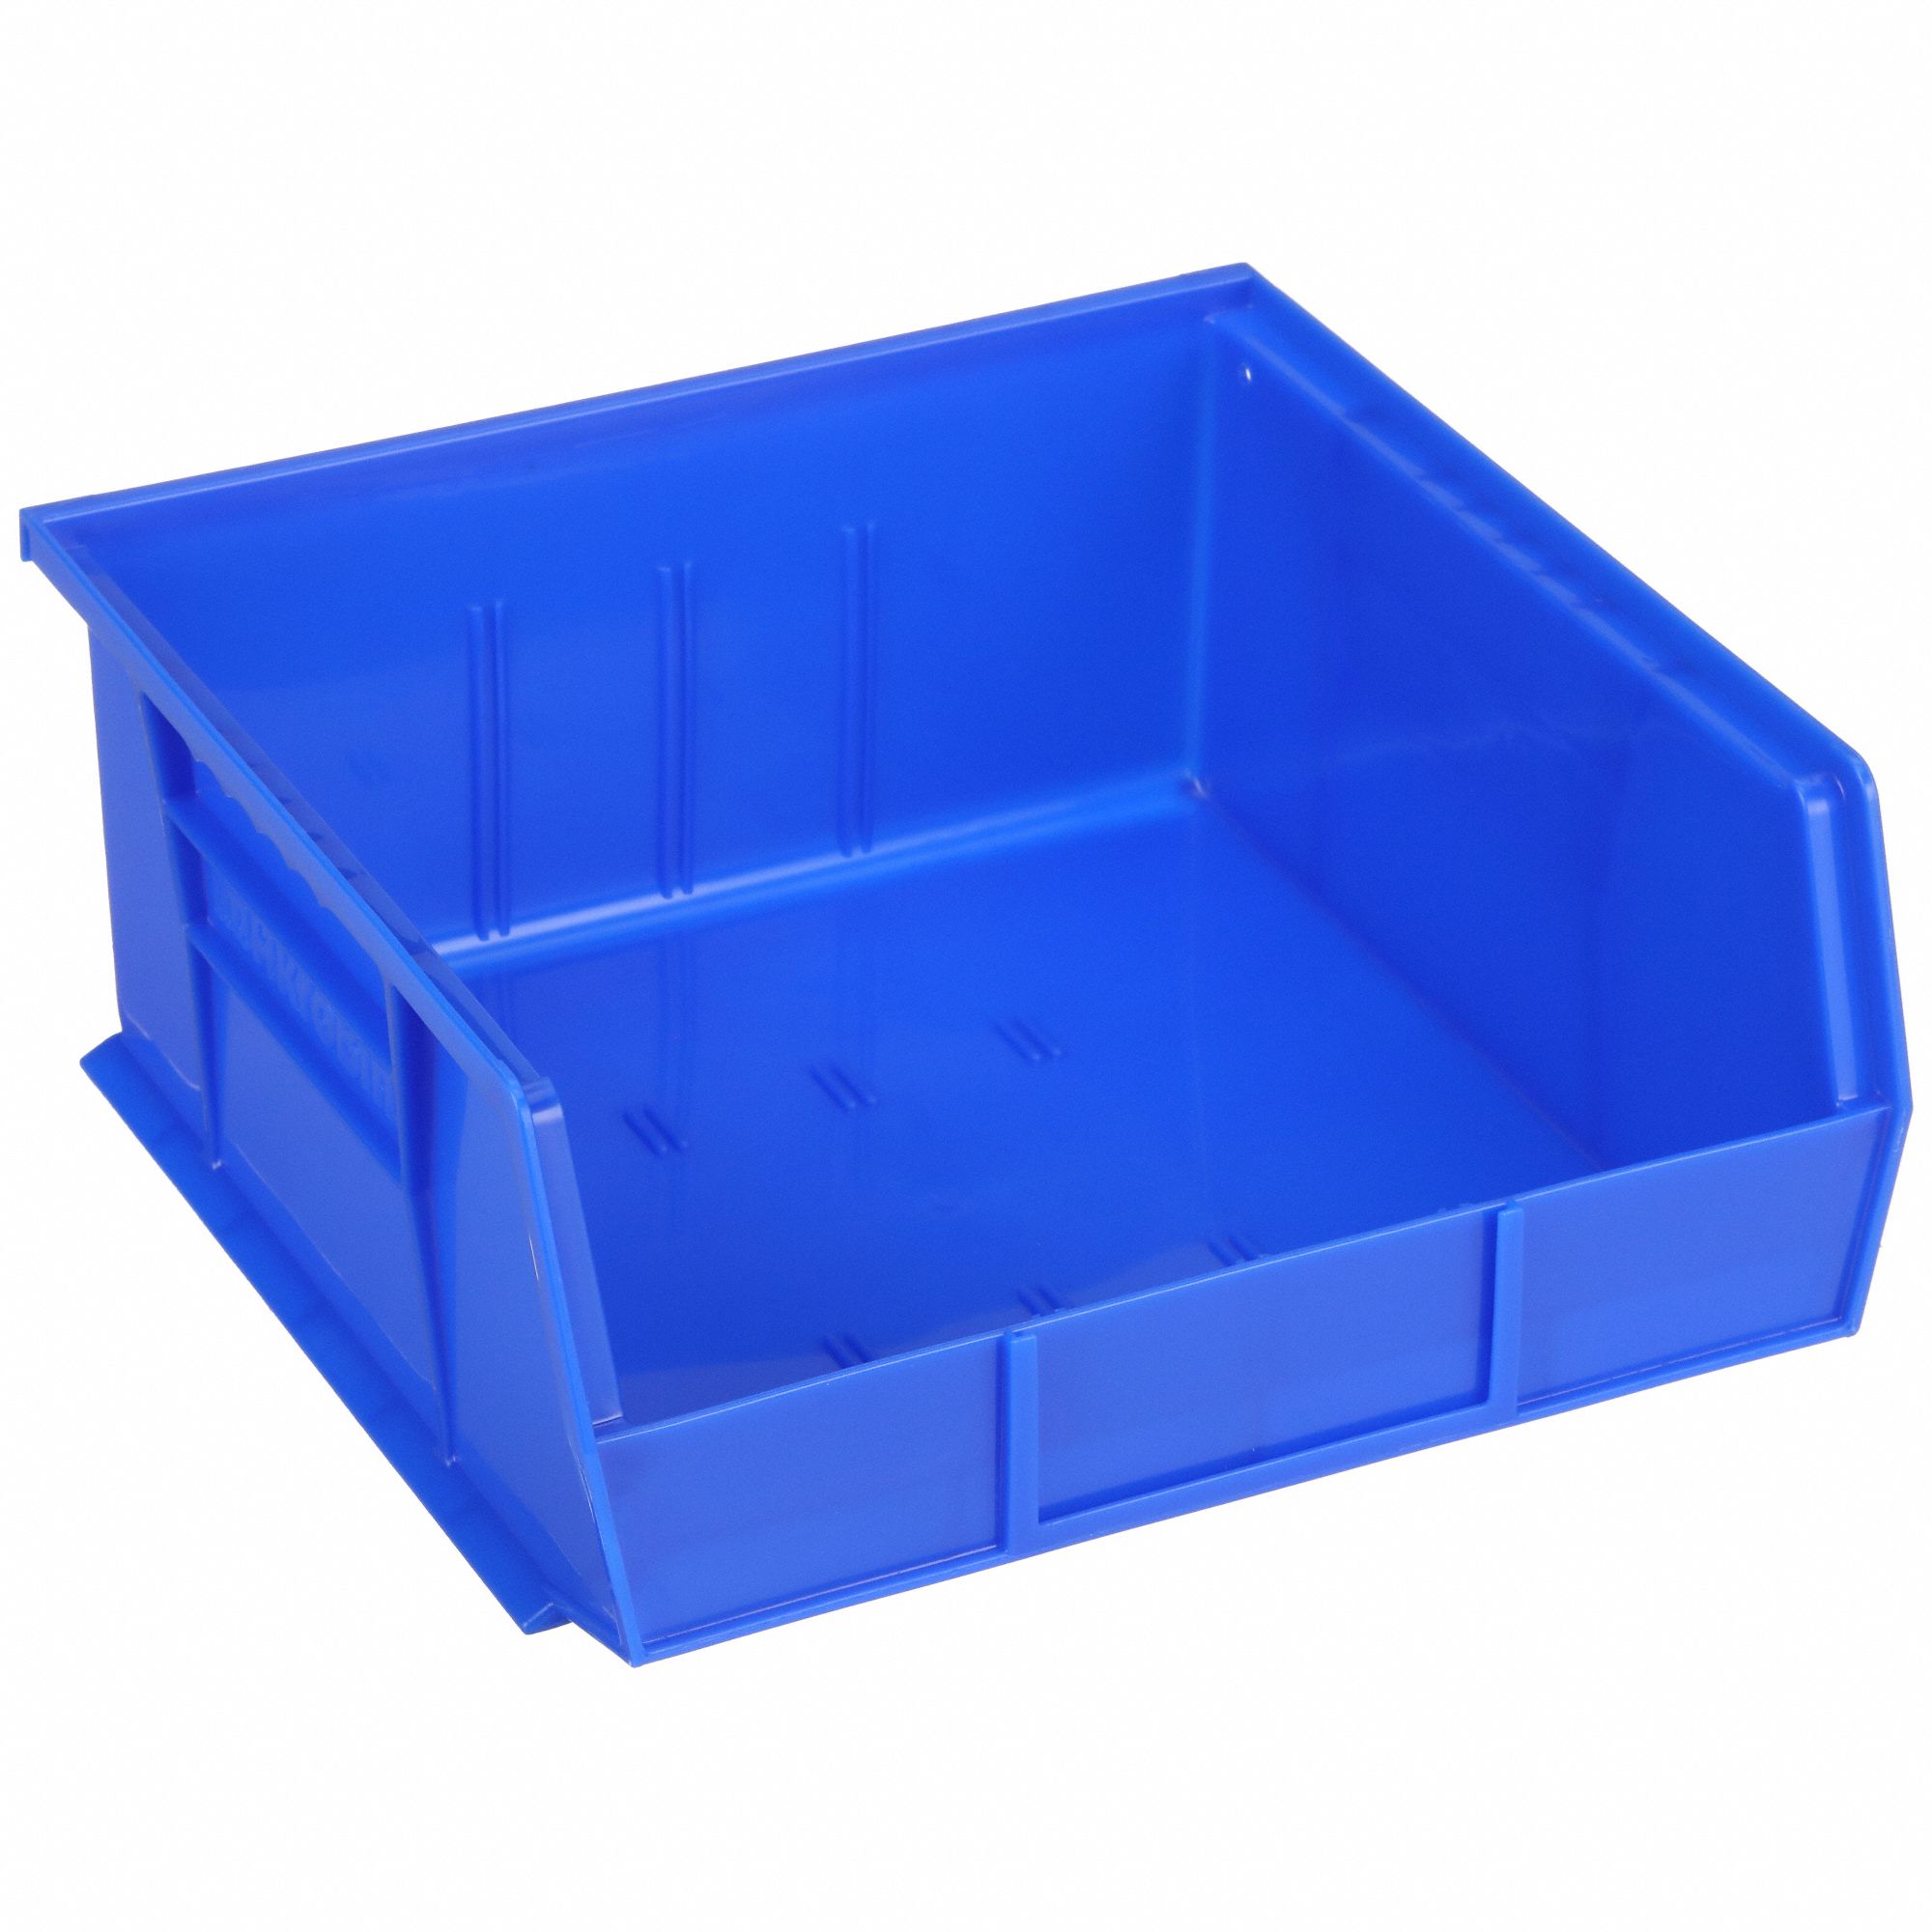 Akro-Mils 35-180 BLUE HDPE Storage Tote Box (without Lid), 0.5 cu ft, 16 x  10 x 5.88 from Cole-Parmer